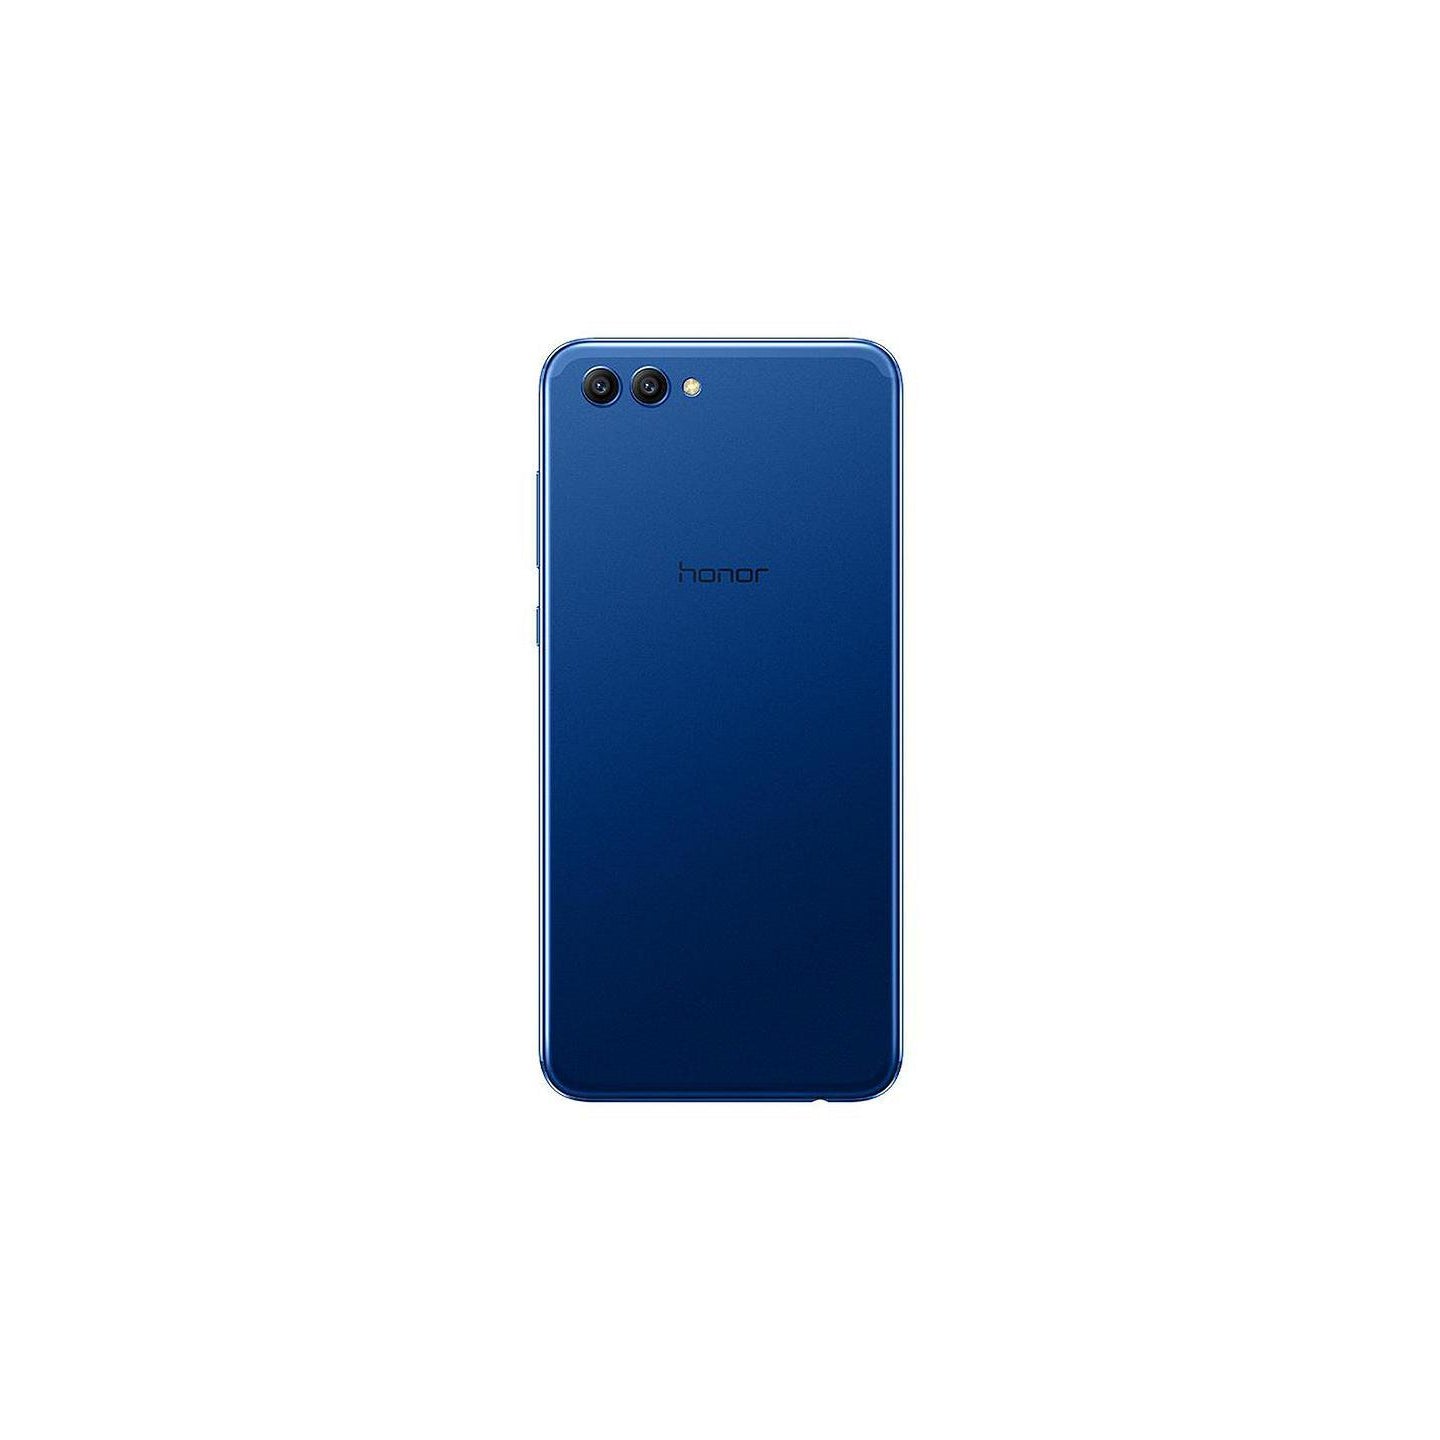 Honor View 10 Smartphone, Android, 5.99”, 4G LTE, SIM Free, 128GB - Blue